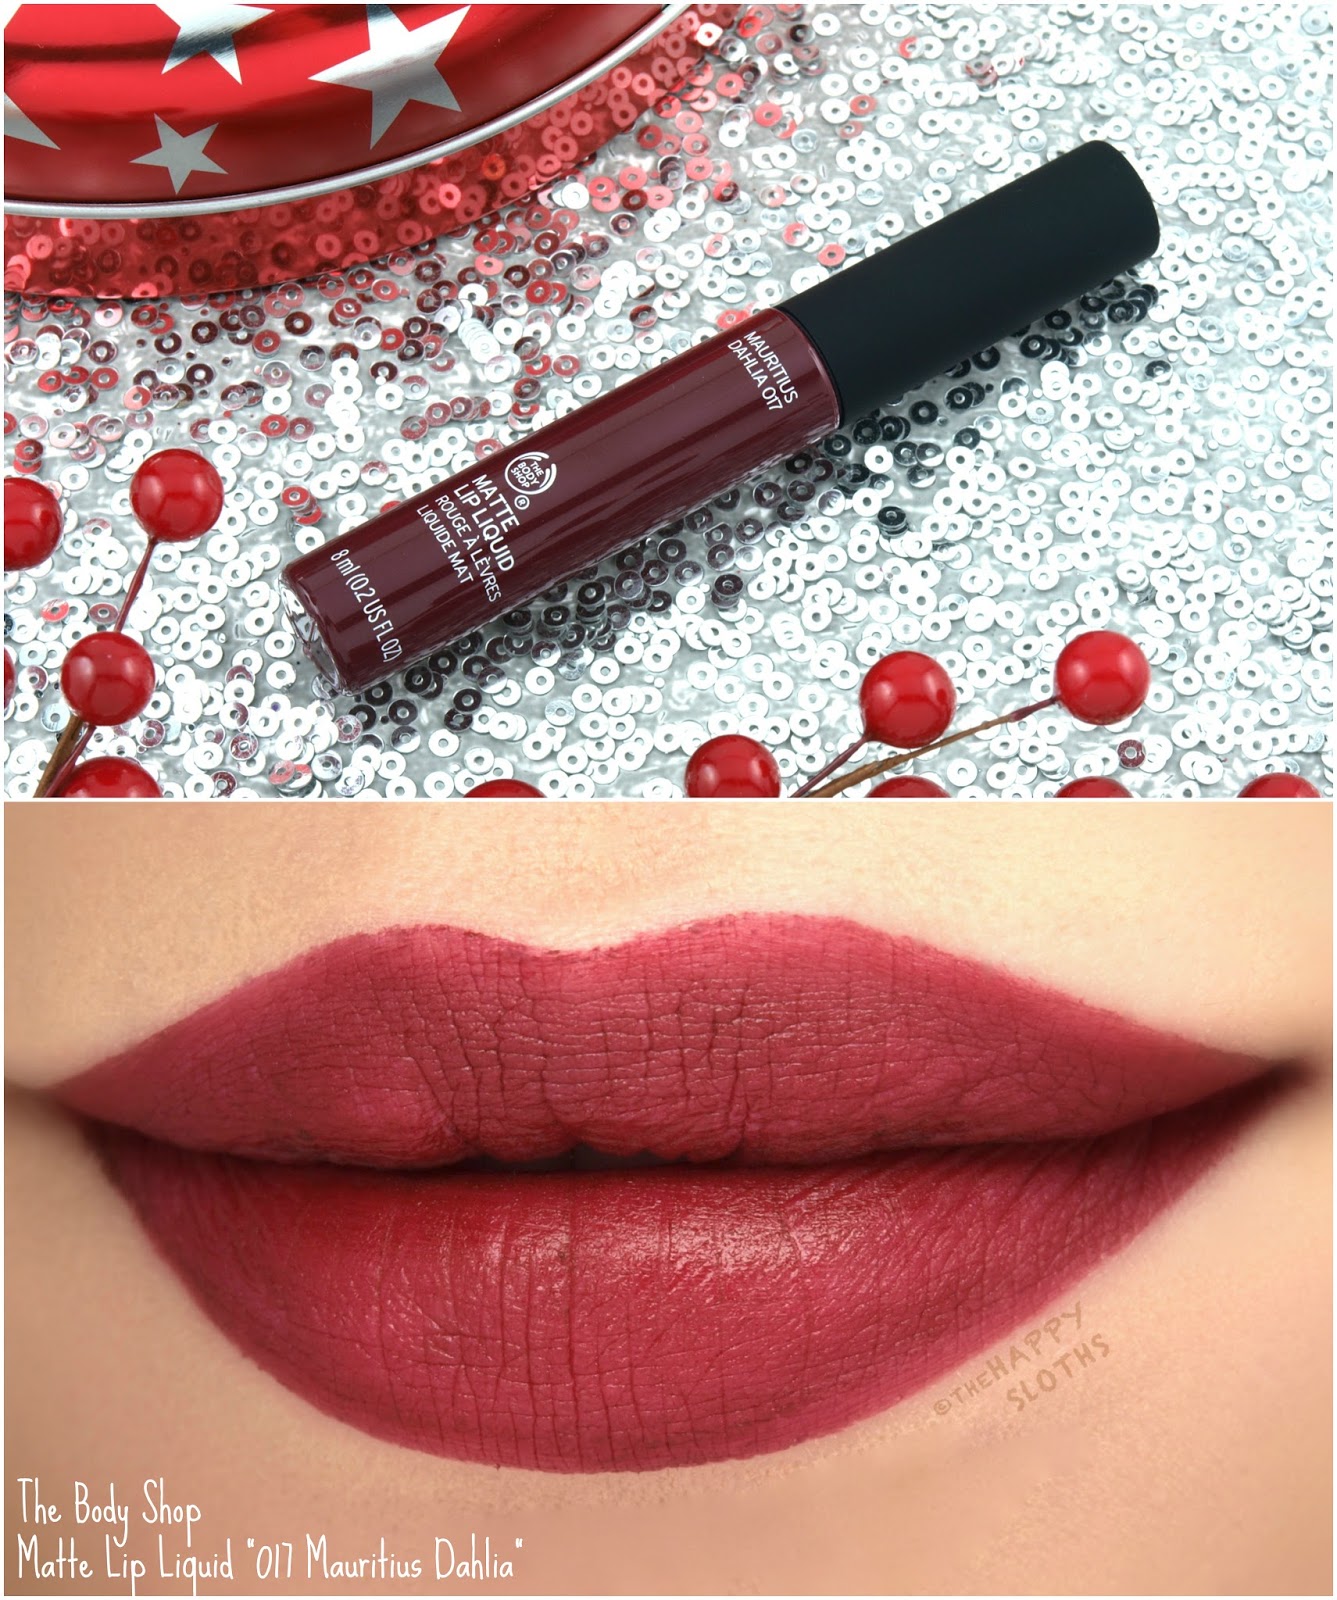 The Body Shop Matte Lip Liquid in "017 Mauritius Dahlia": Review and Swatches